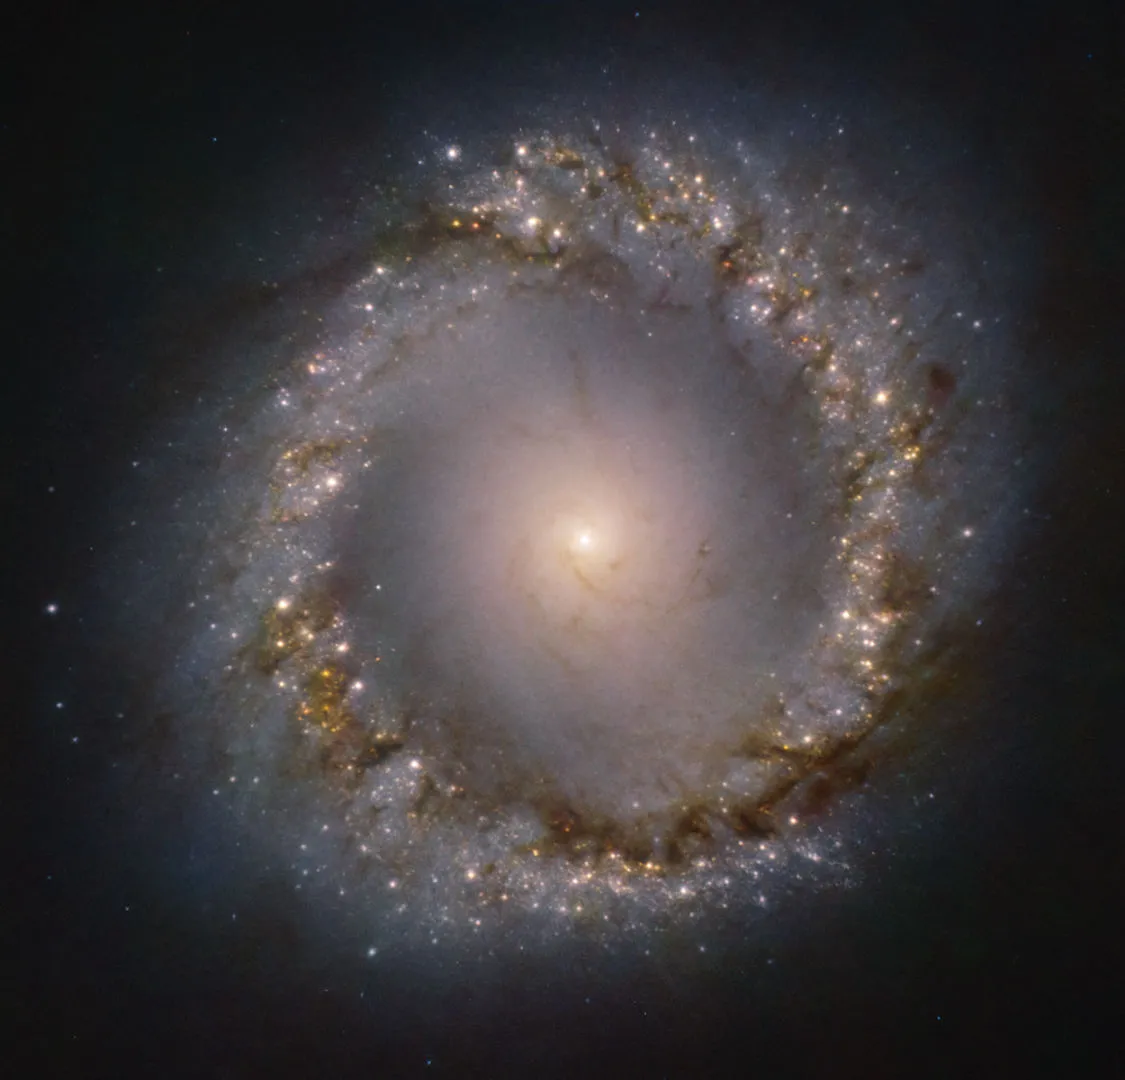 The core of NGC 1097 in Fornax Very Large Telescope, 23 November 2022